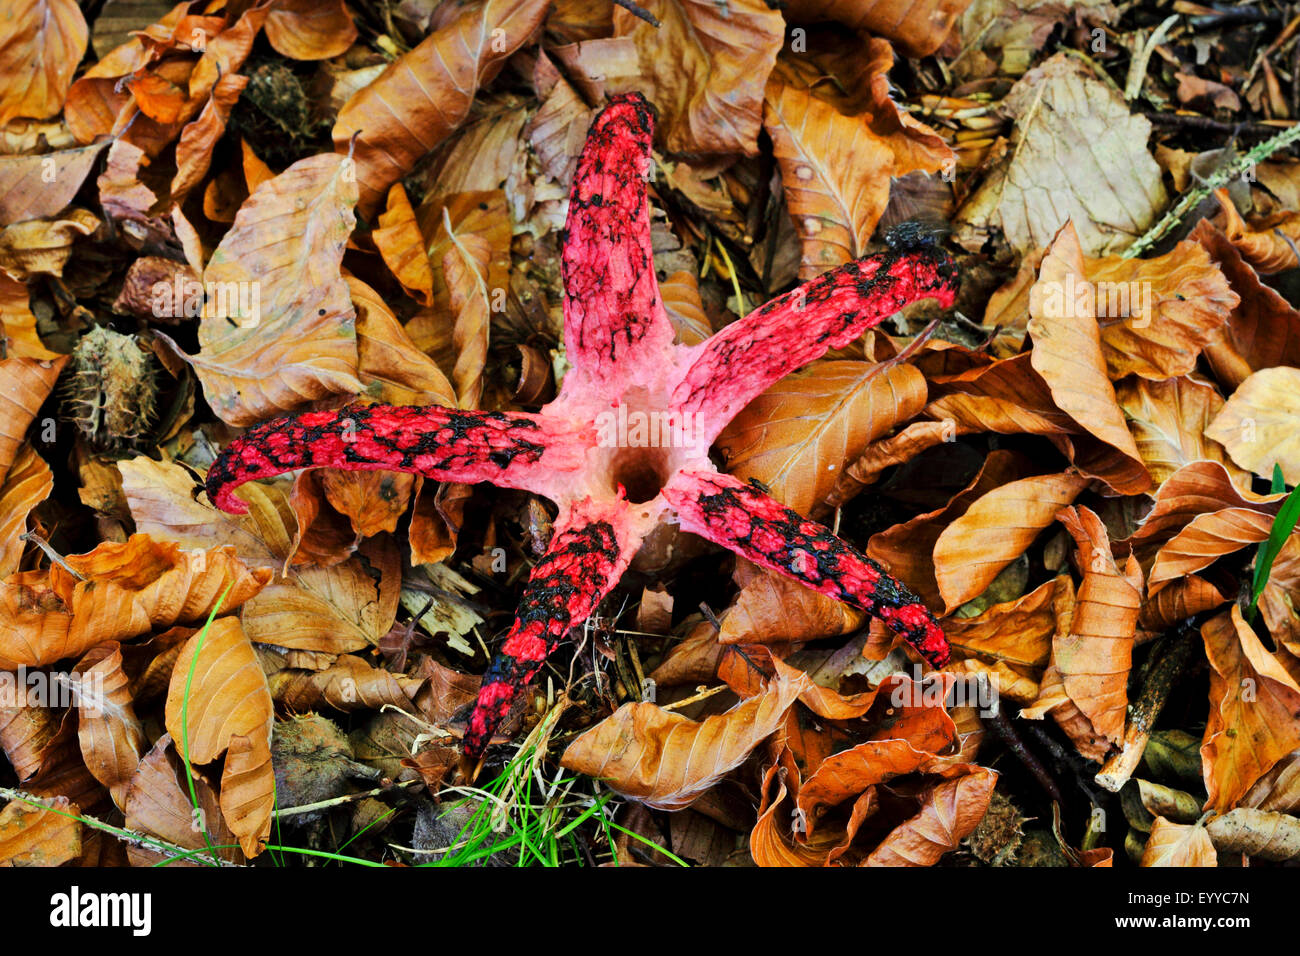 Devil's fingers, Devil's claw fungus, Giant stink horn, Octopus stinkhorn (Anthurus archeri, Clathrus archeri), fruiting body on forest ground, view from above, Germany Stock Photo